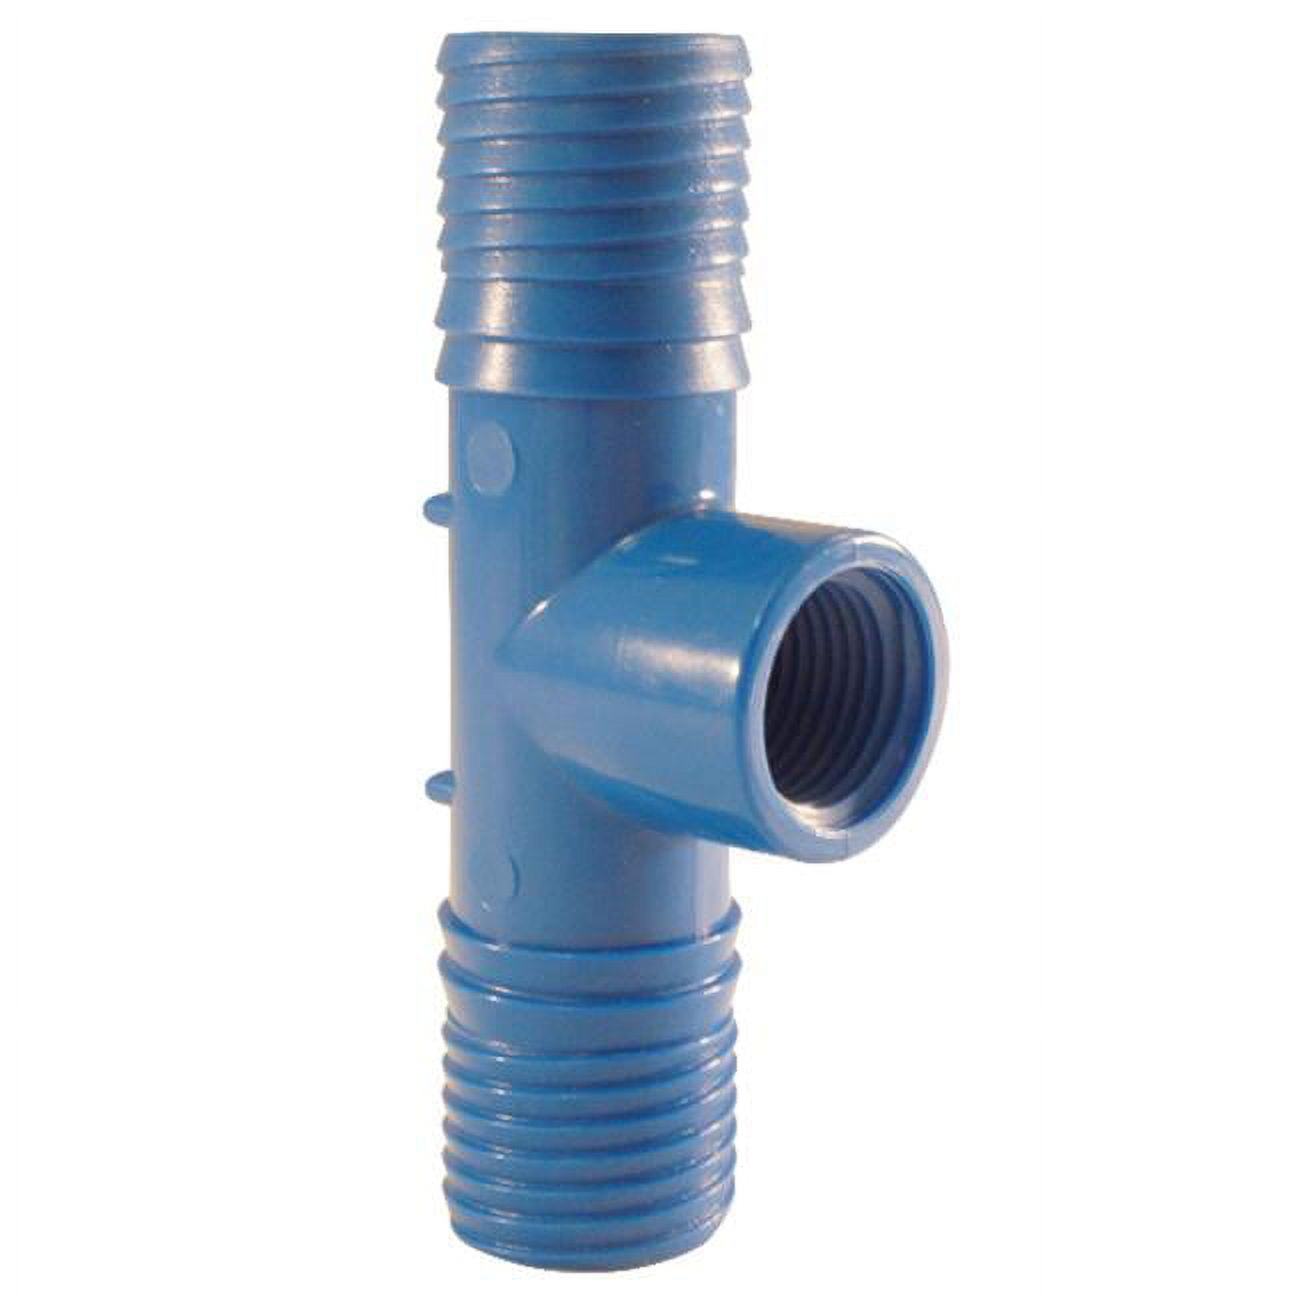 4814737 1 In. Dia. X 1 In. Dia. X 0.75 In. Dia. Fpt Polypropylene Tee, Blue